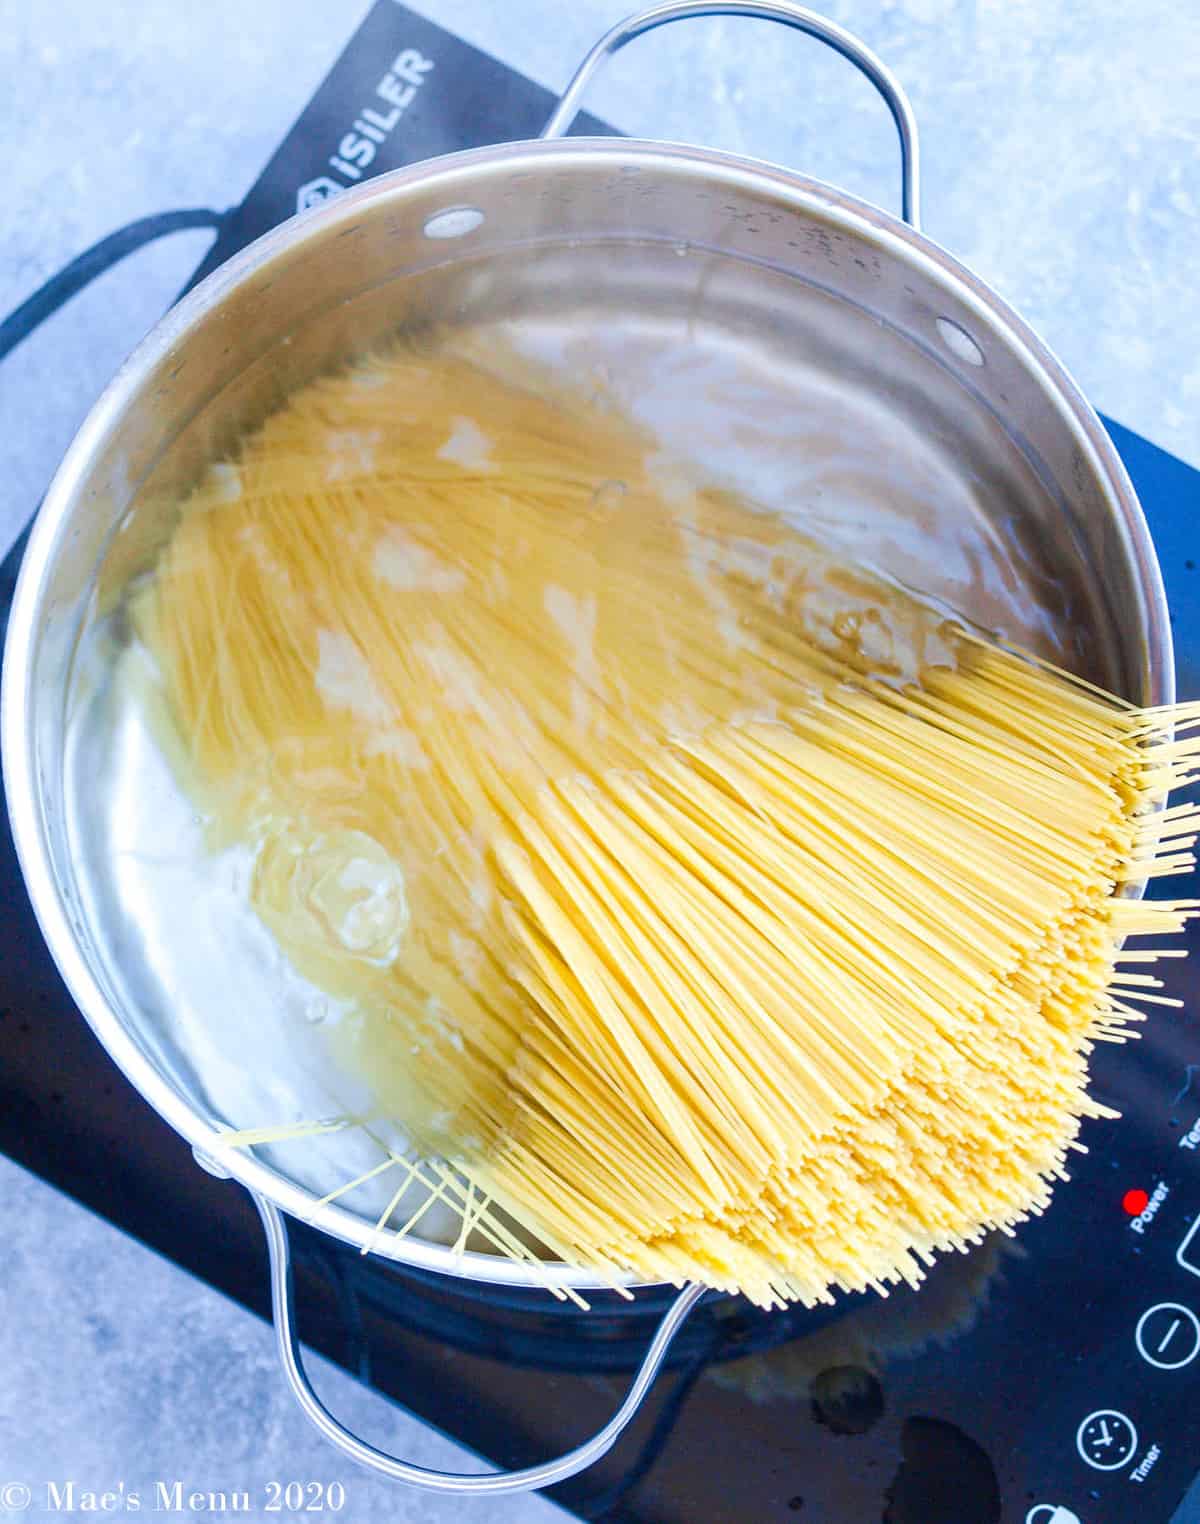 Boiling angel hair pasta in a stockpot